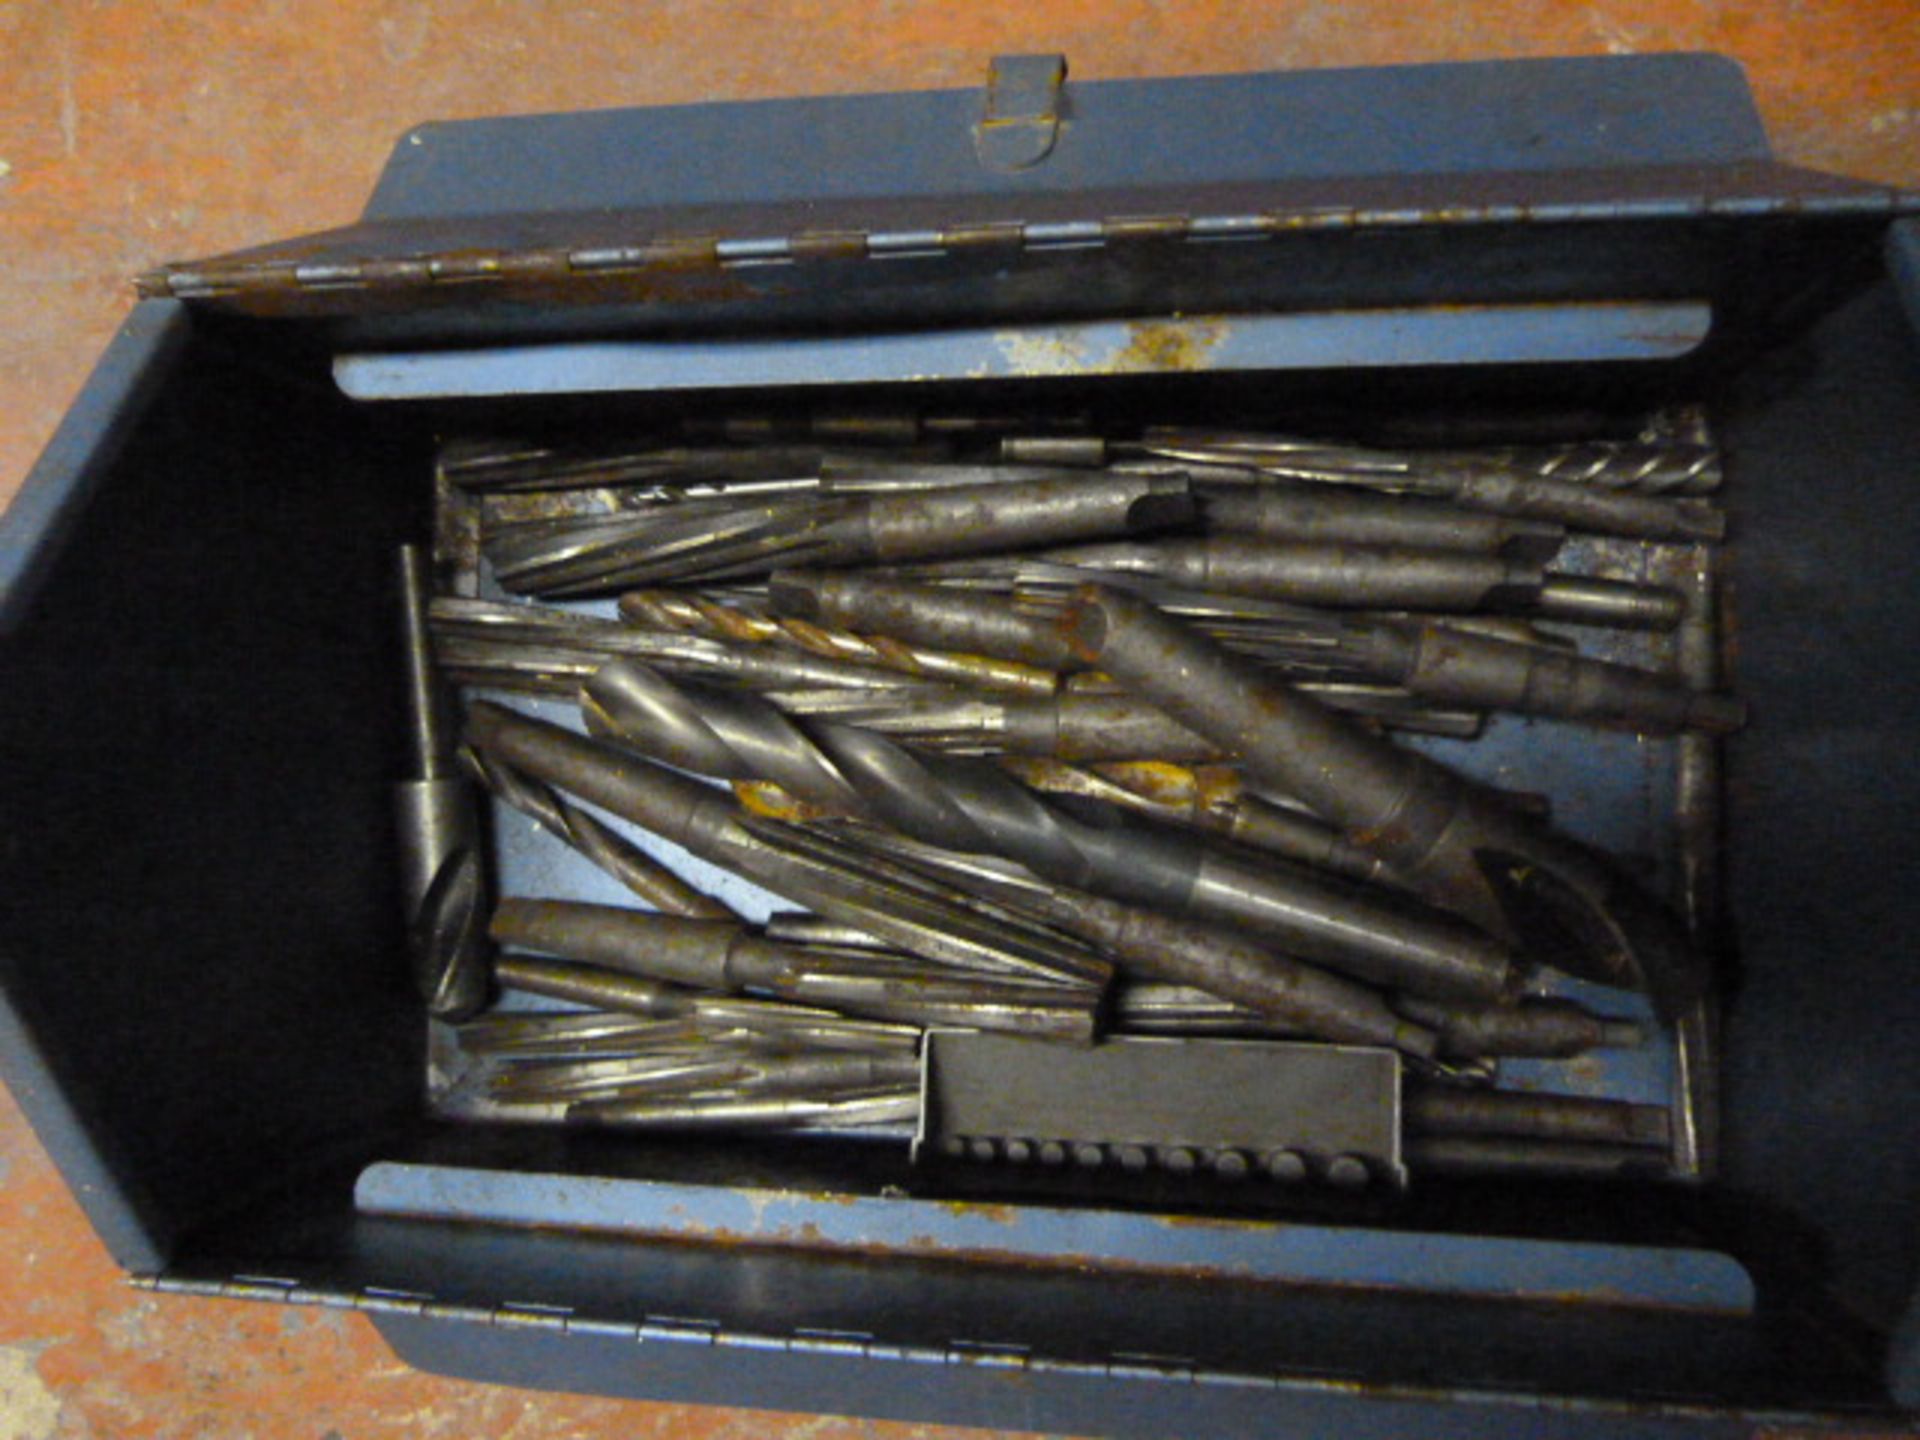 Toolbox with a Quantity of Drill Bits